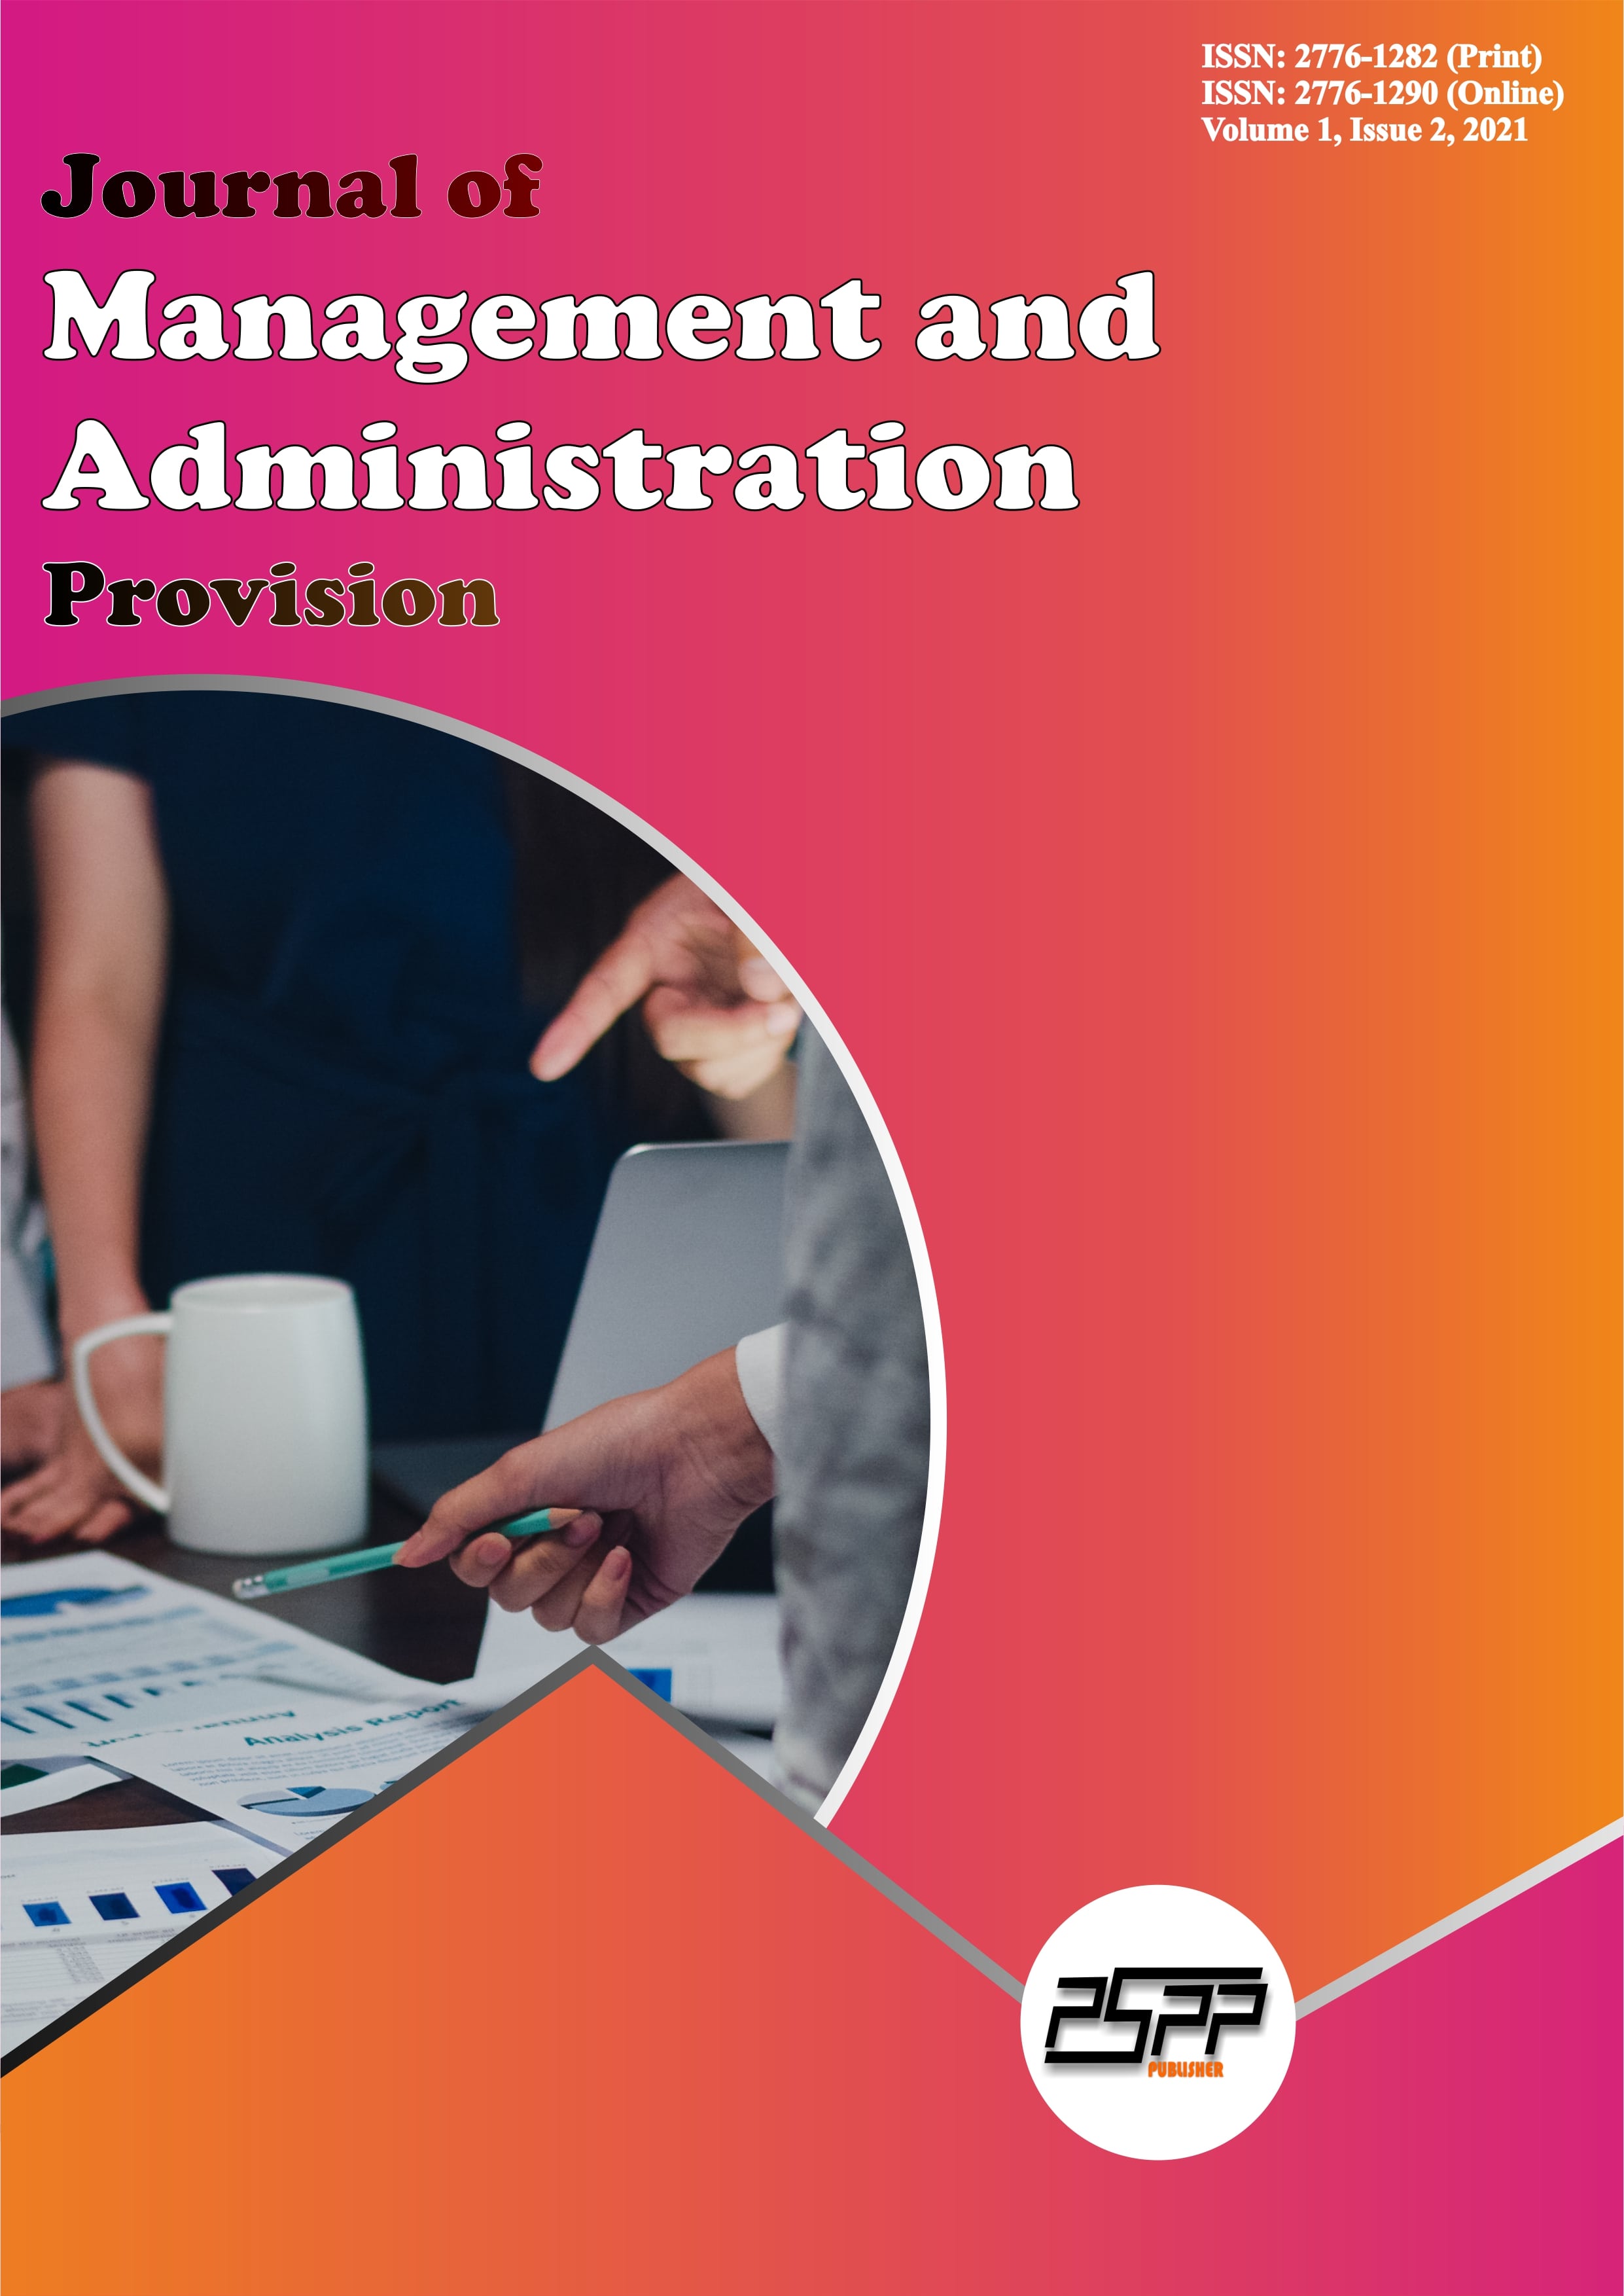 					View Vol. 1 No. 2 (2021): Journal of Management and Administration Provision
				